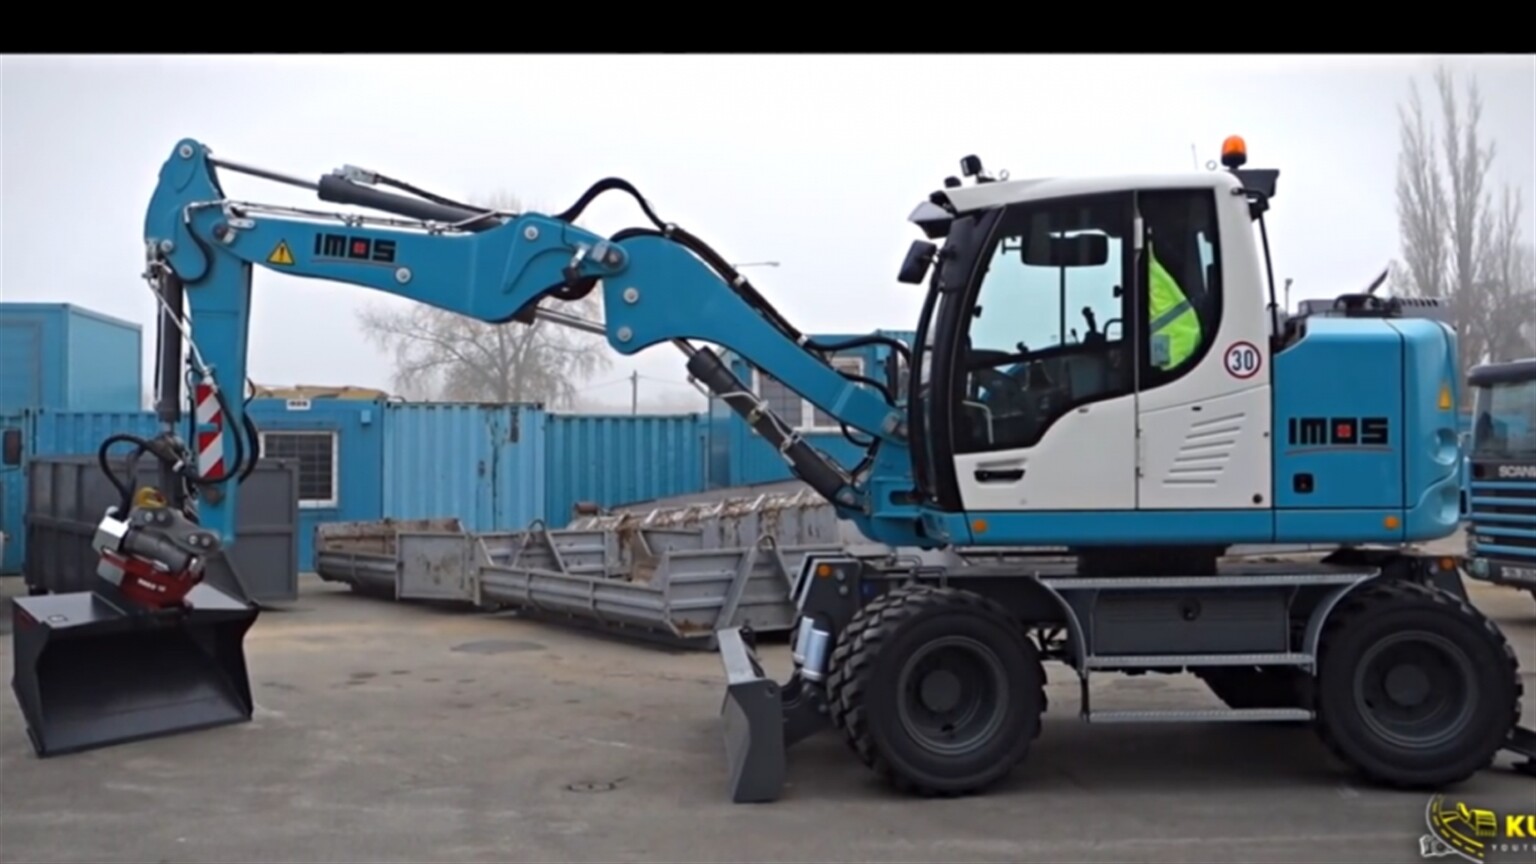 Liebherr Compact in the blue